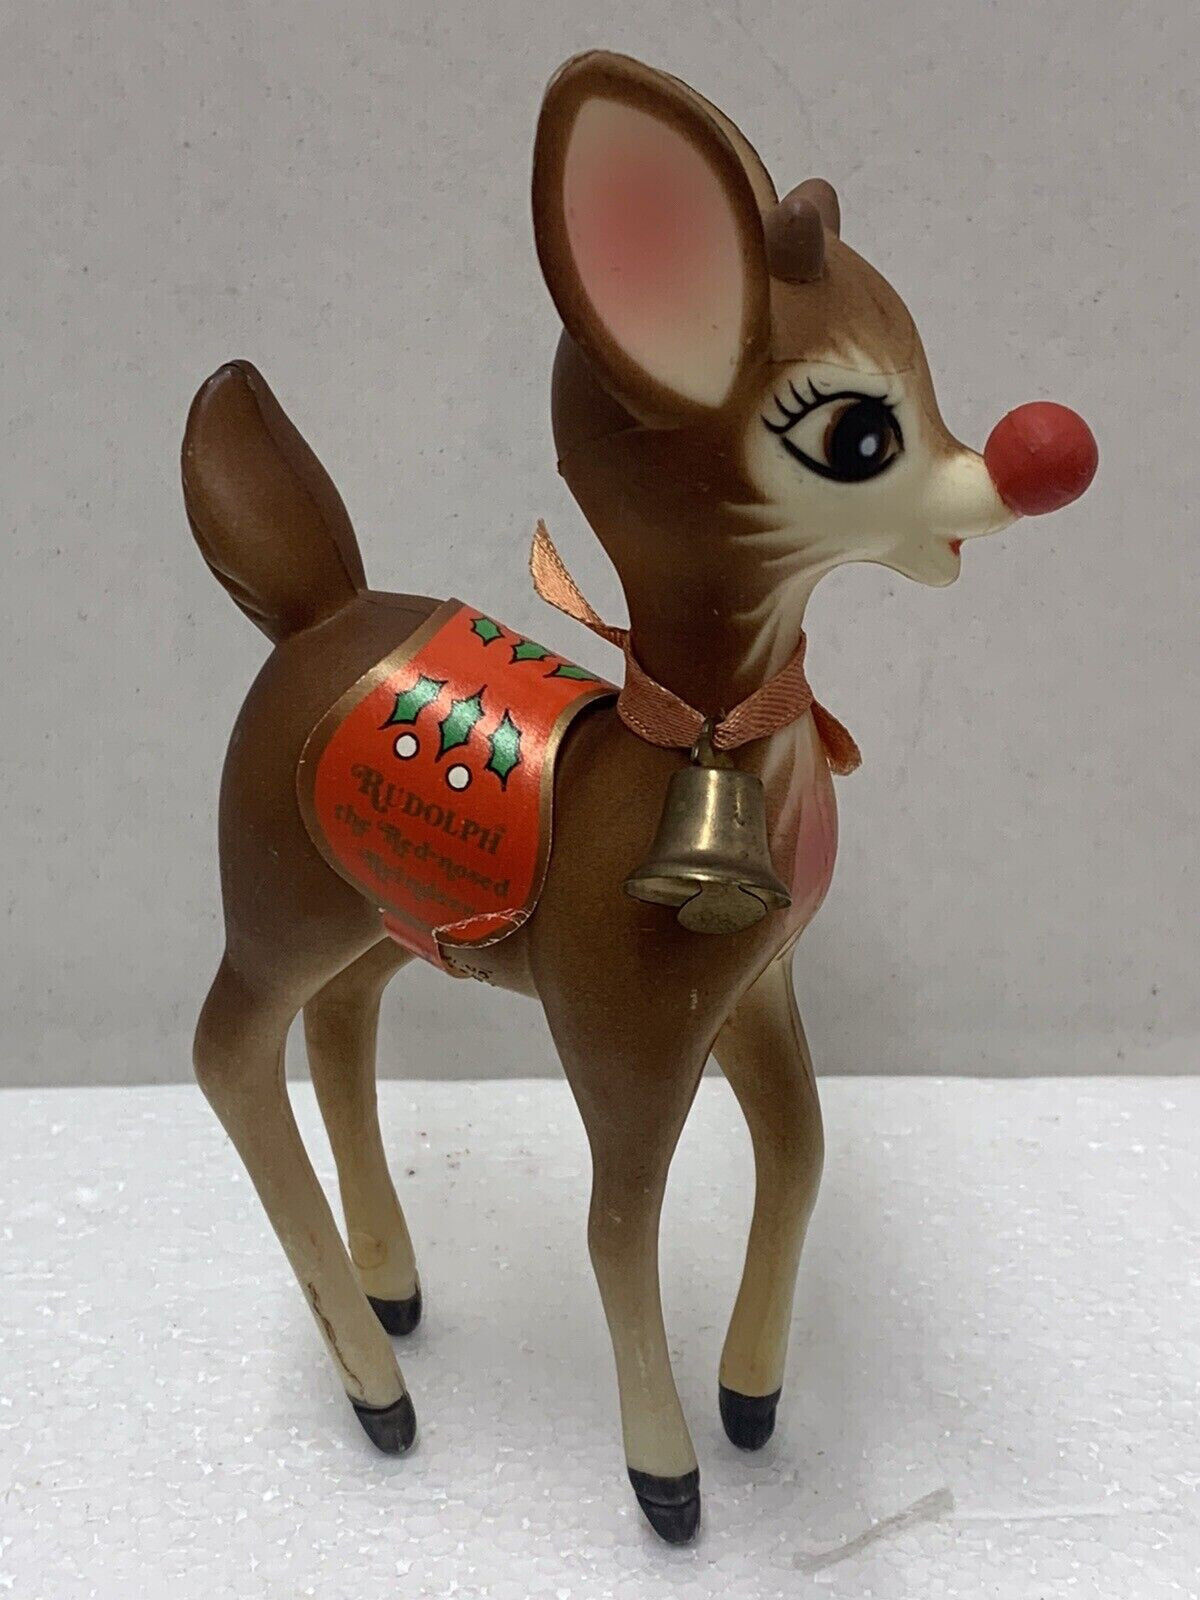 1981 RLM Trust Rare Rudolph The Red-Nosed Reindeer Hong Kong Good Condition